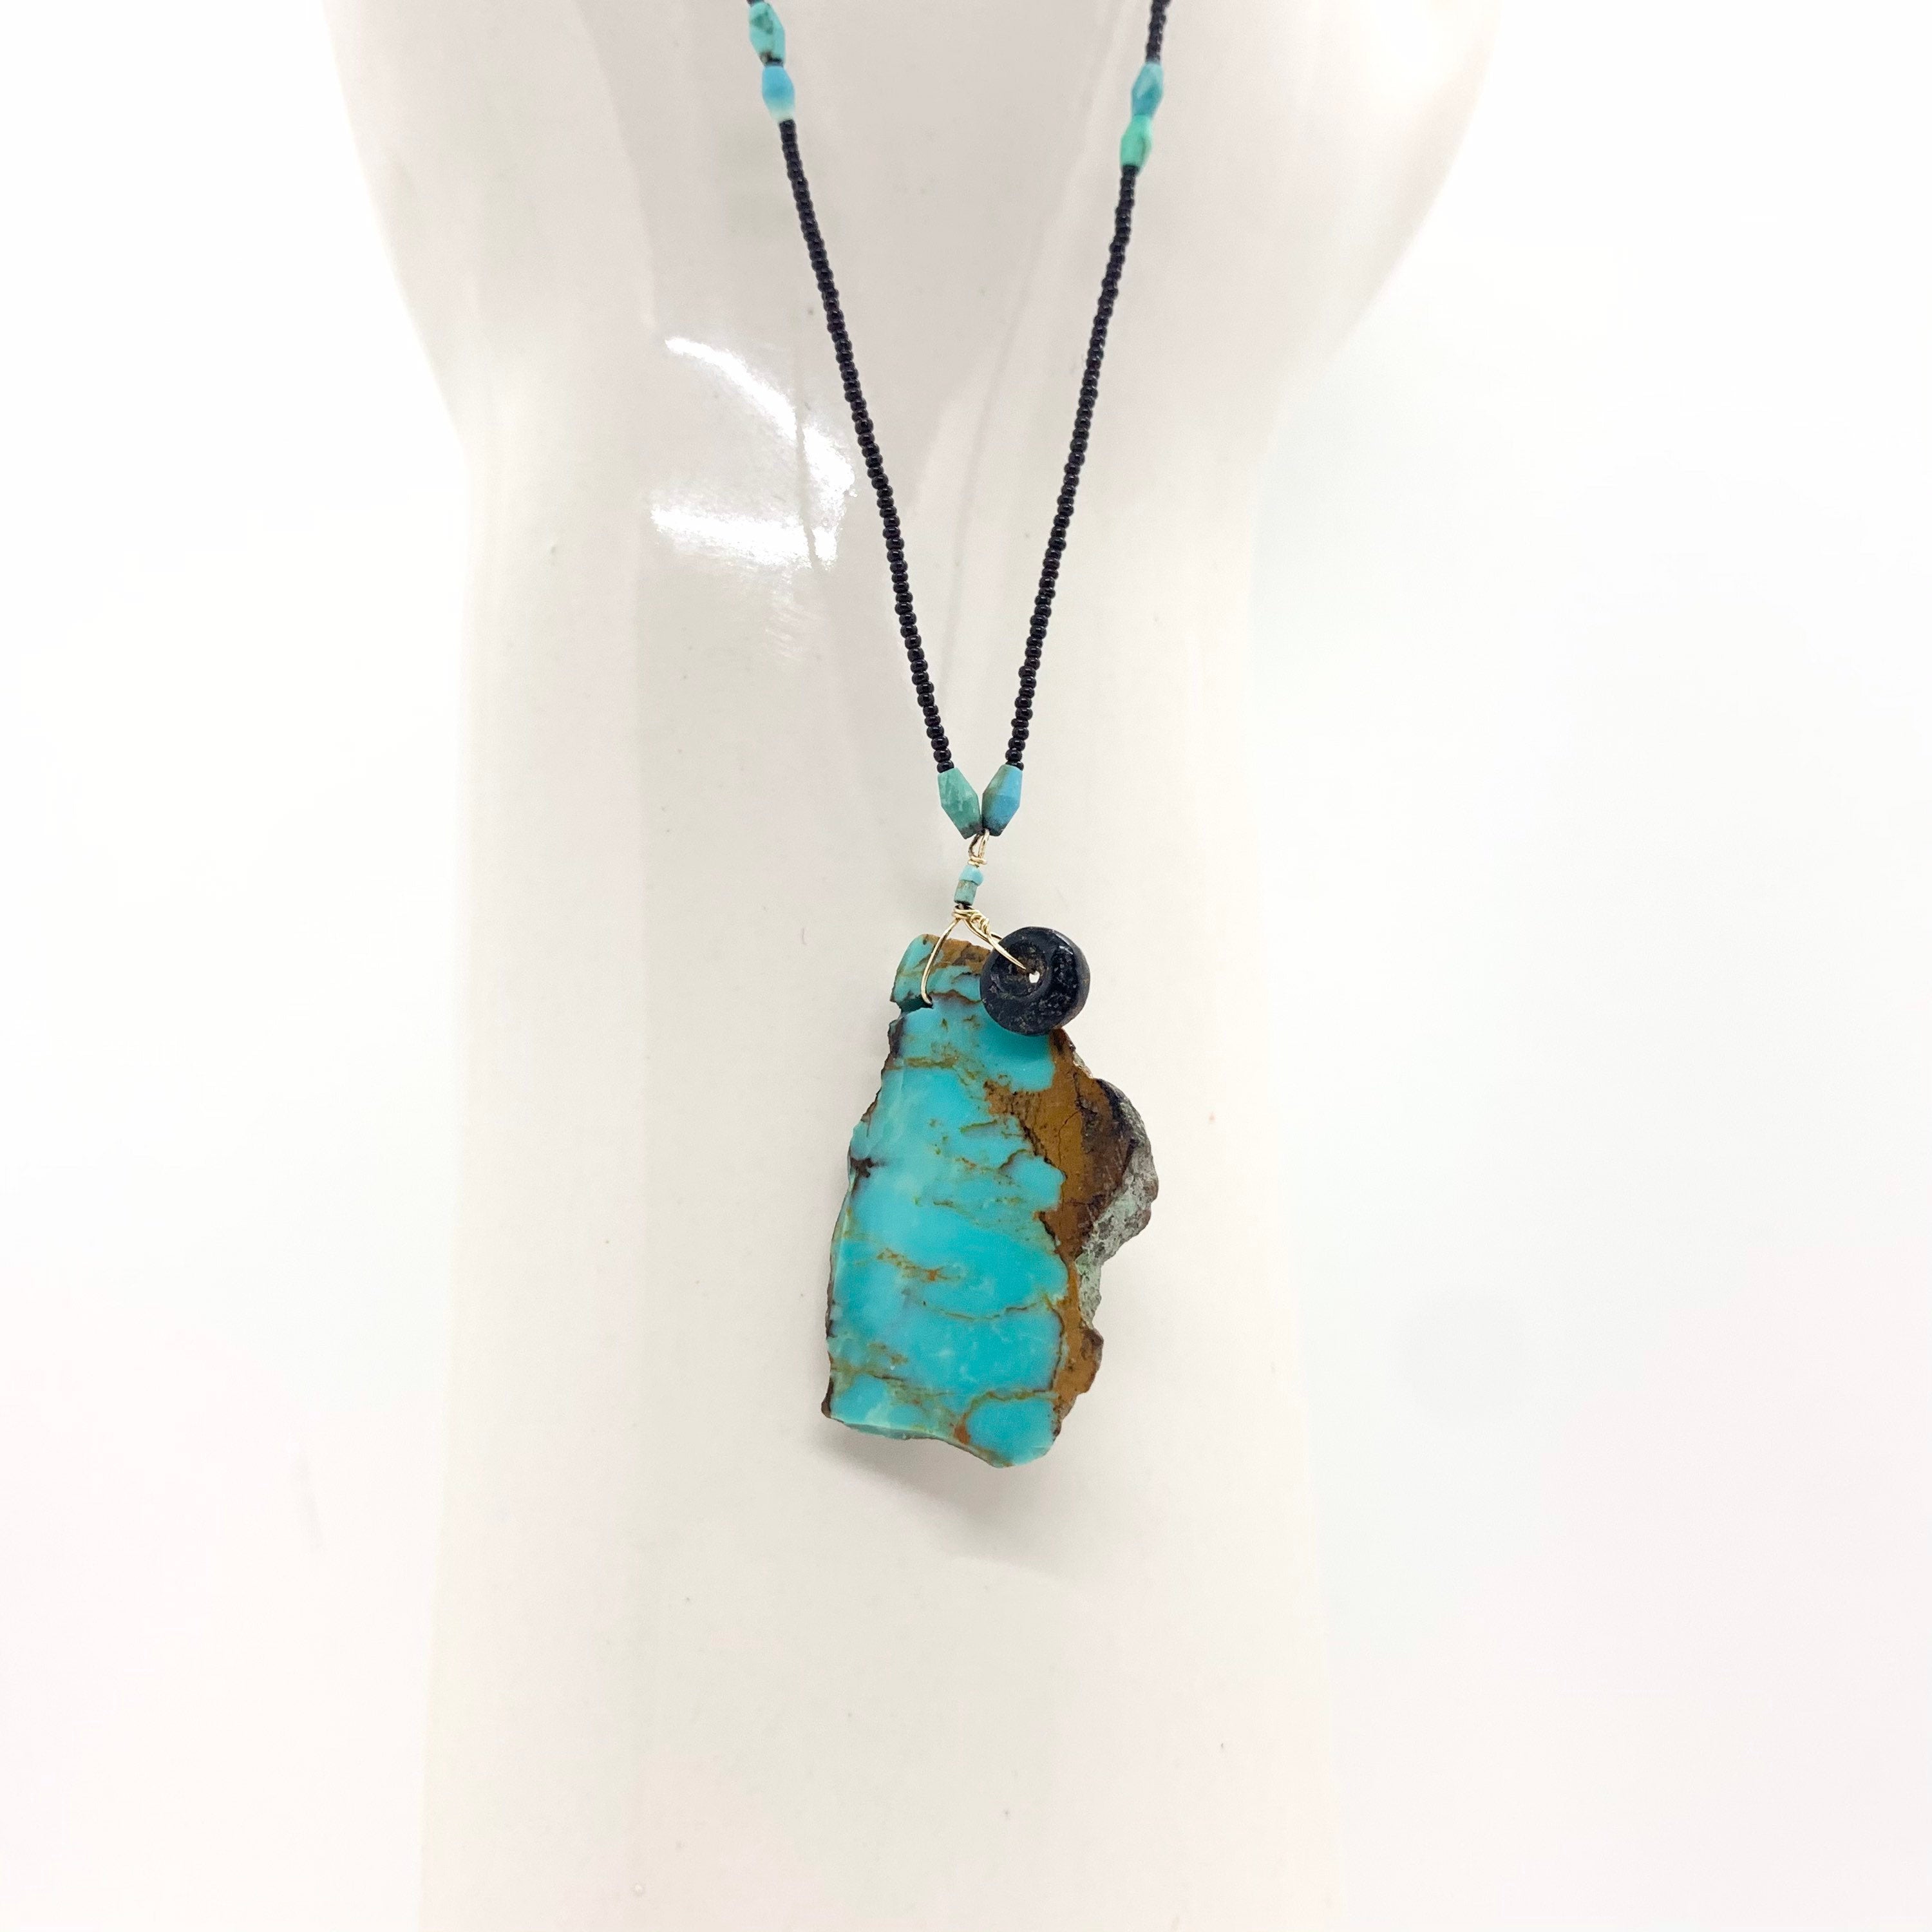 String Beaded Necklace w/ Turquoise Pendant, Pre-Columbian Bead, Afghan Turquoise & Antique Italian Beads